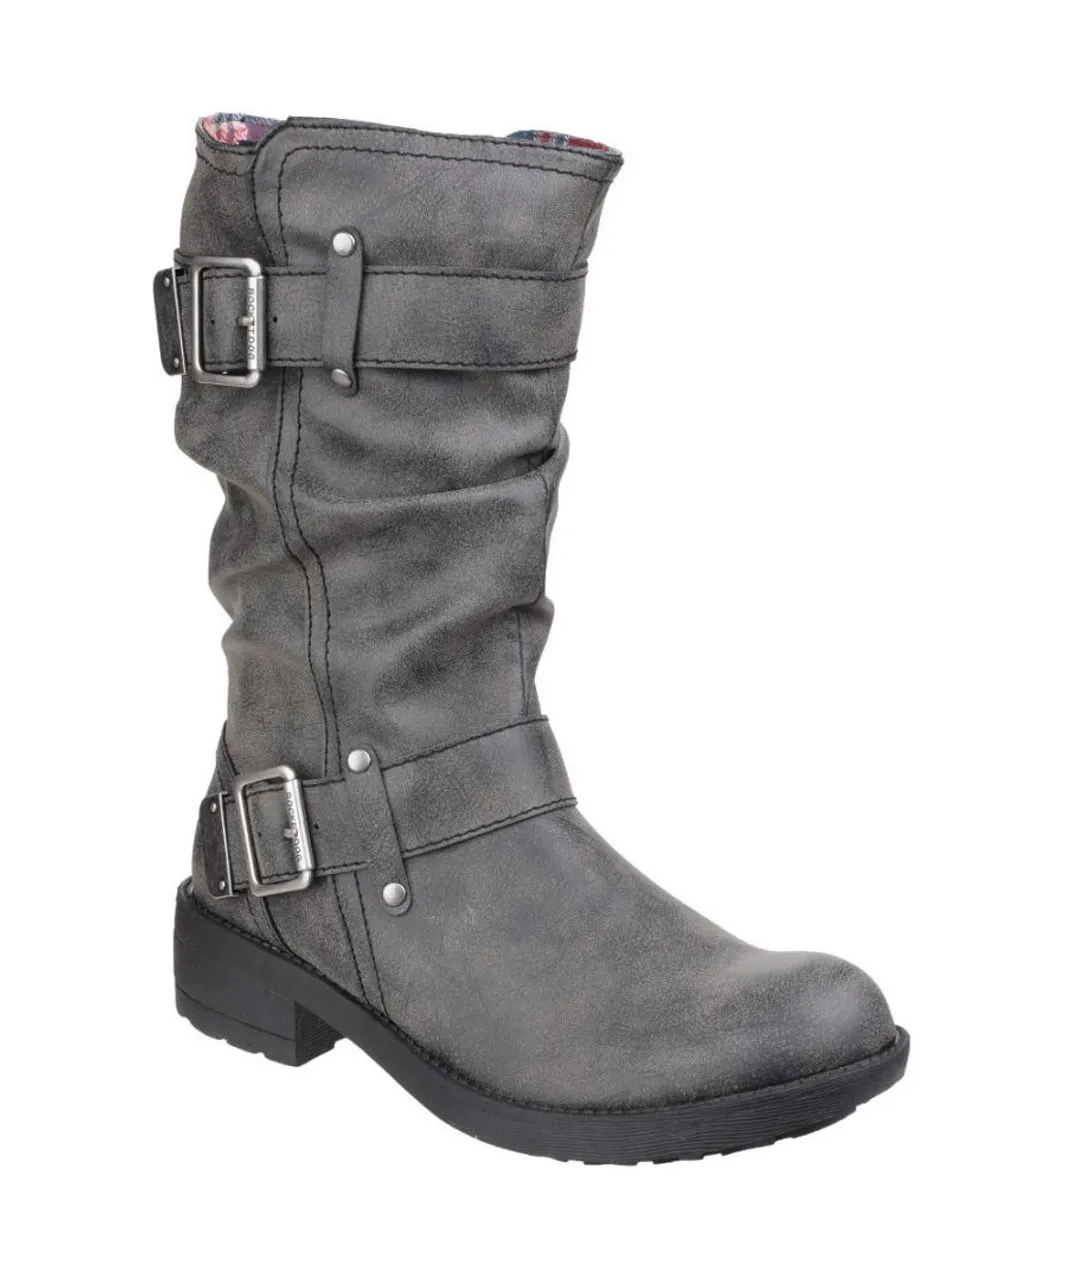 Rocket Dog Womens/Ladies Trumble Zip up Faux Leather Mid Calf Boots - Black